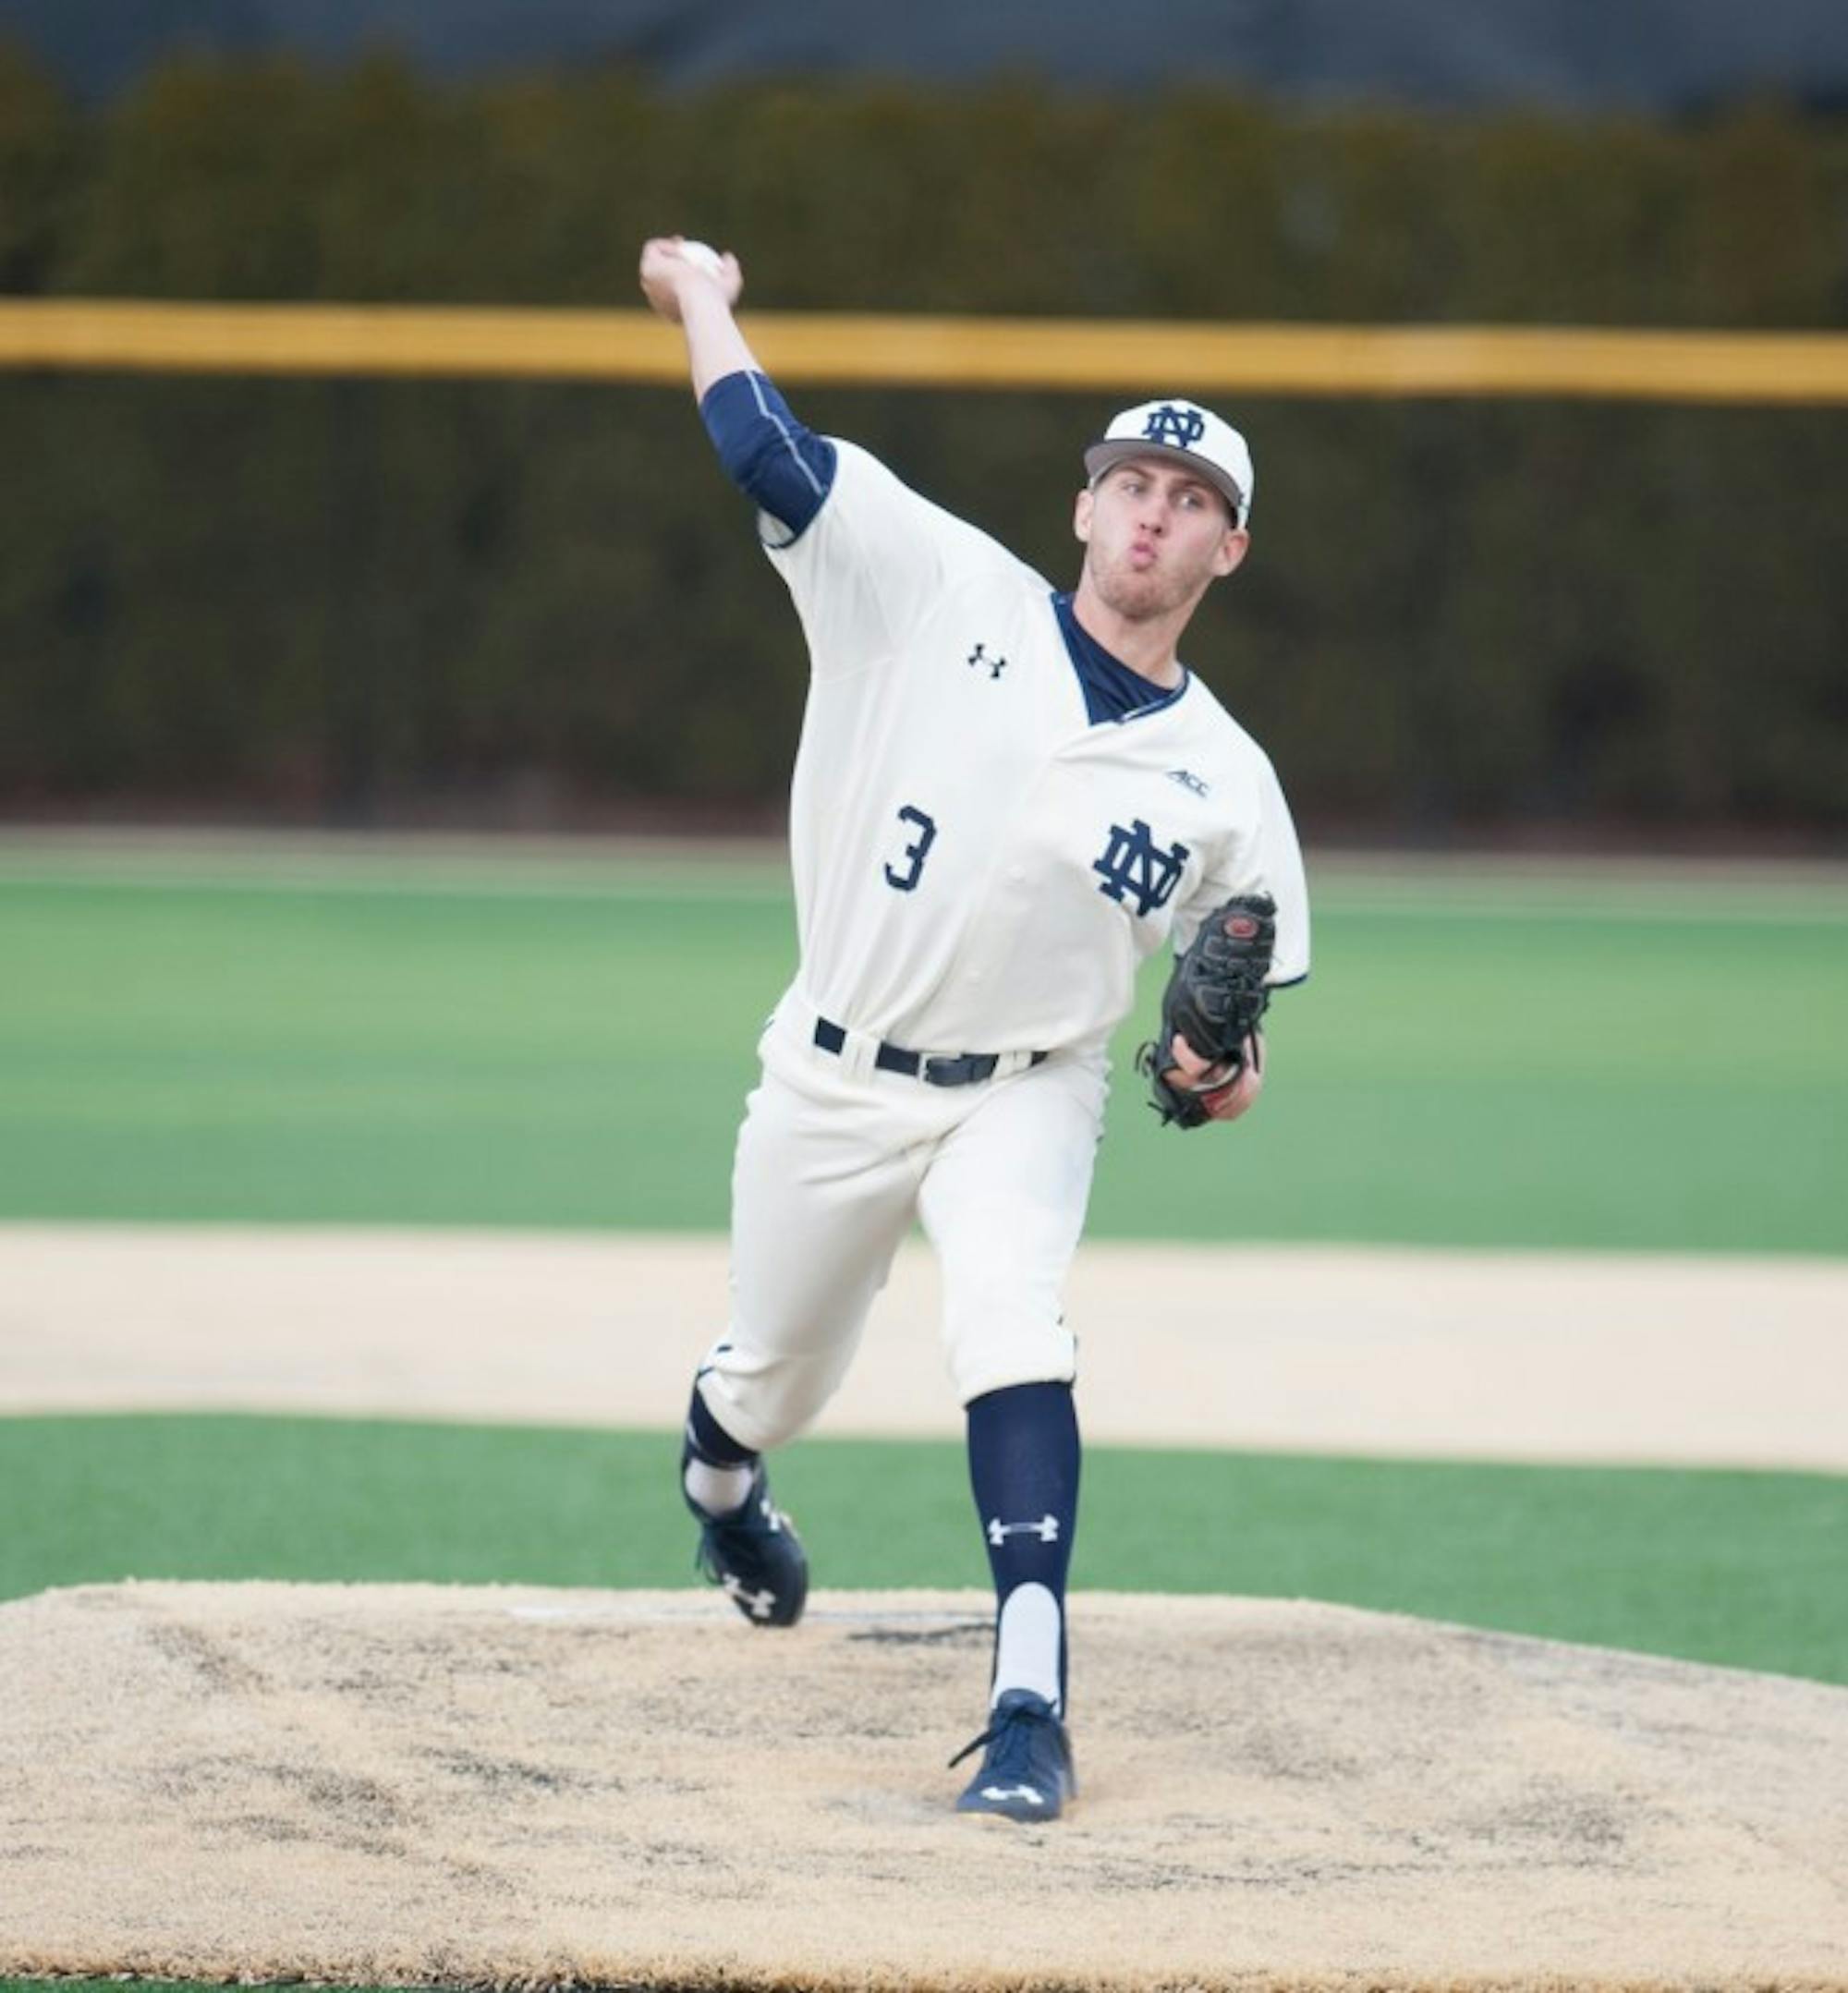 Sophomore right-hander Ryan Smoyer pitches against Central Michigan on March 18 at Frank Eck Stadium.